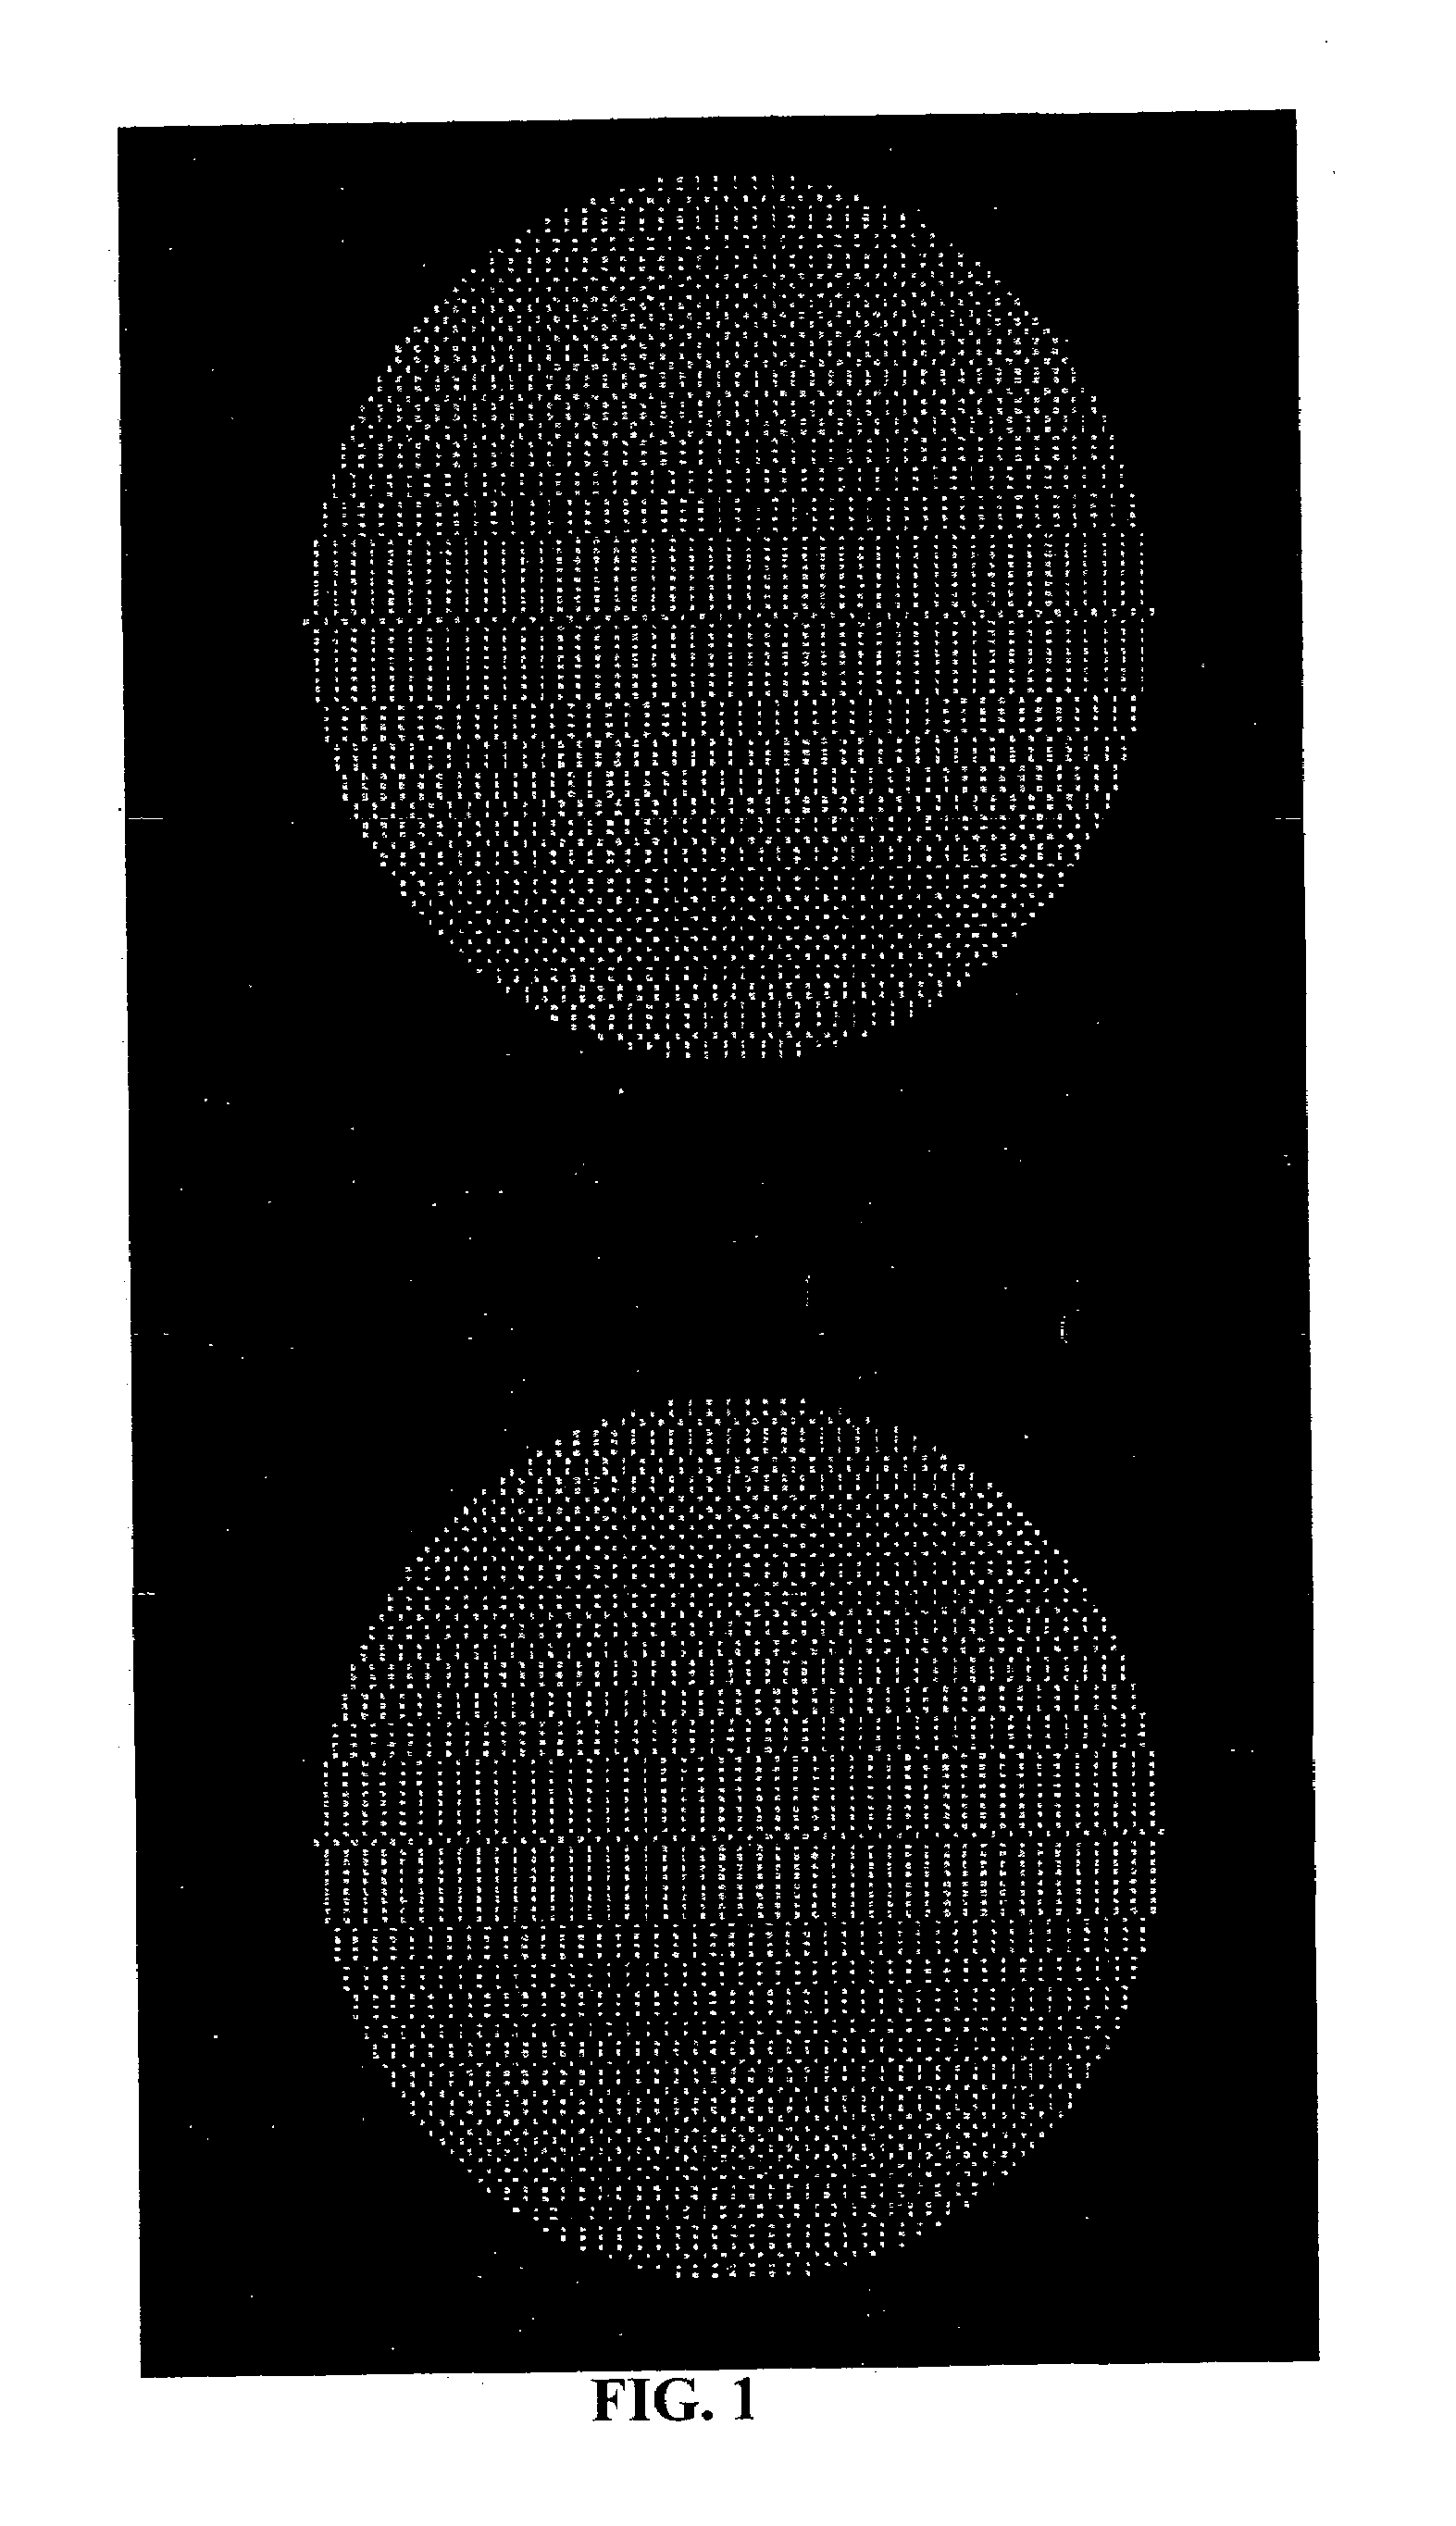 Microarray with hydrophobic barriers